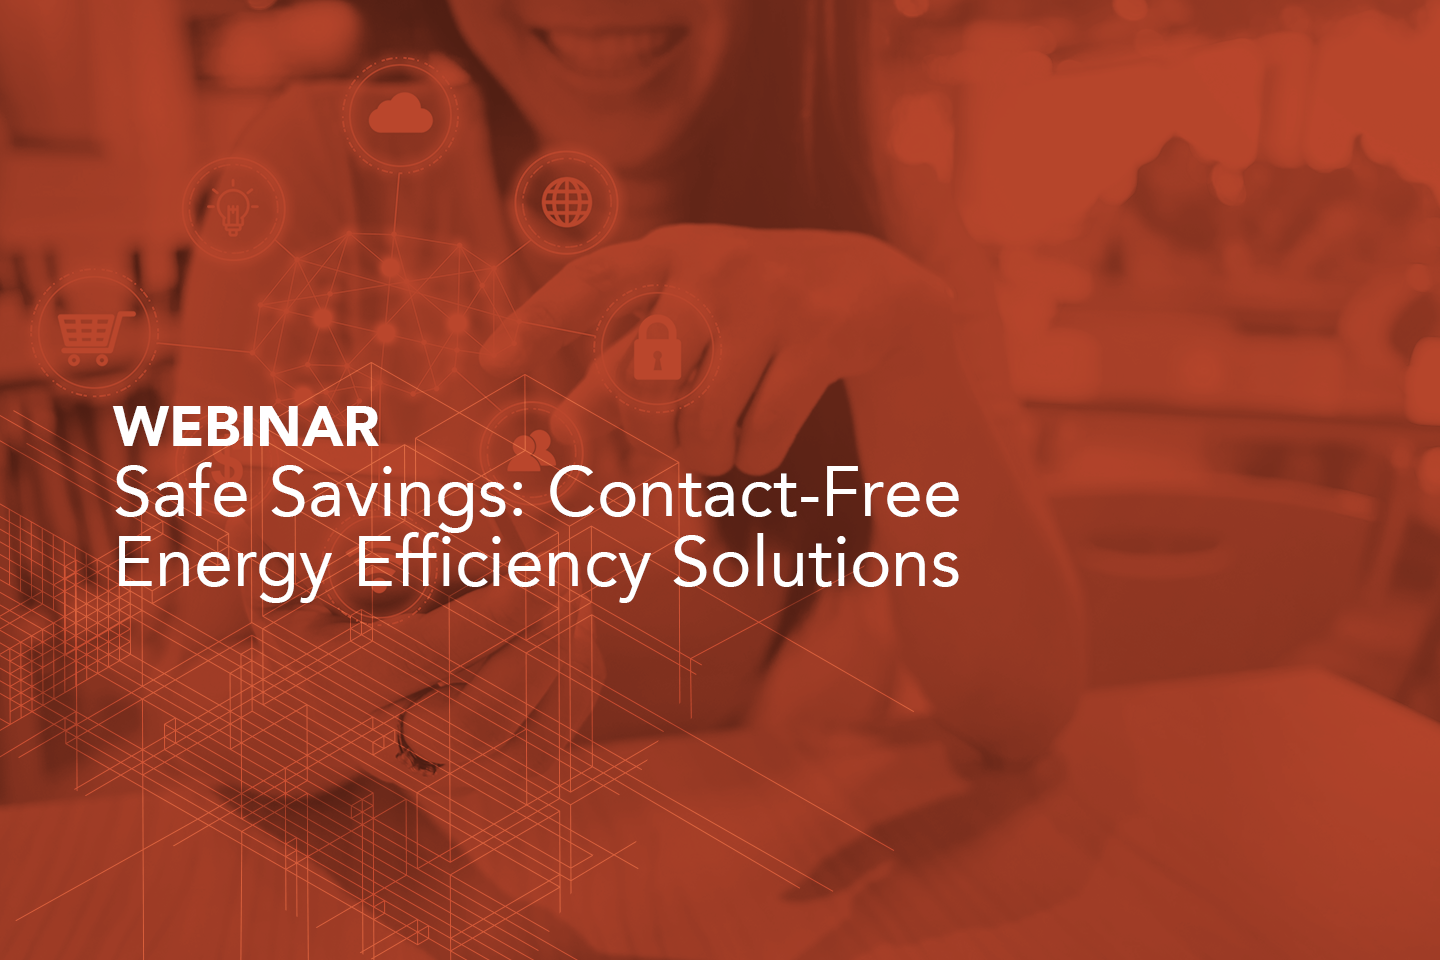 Safe Savings: Contact-Free Energy Efficiency Solutions